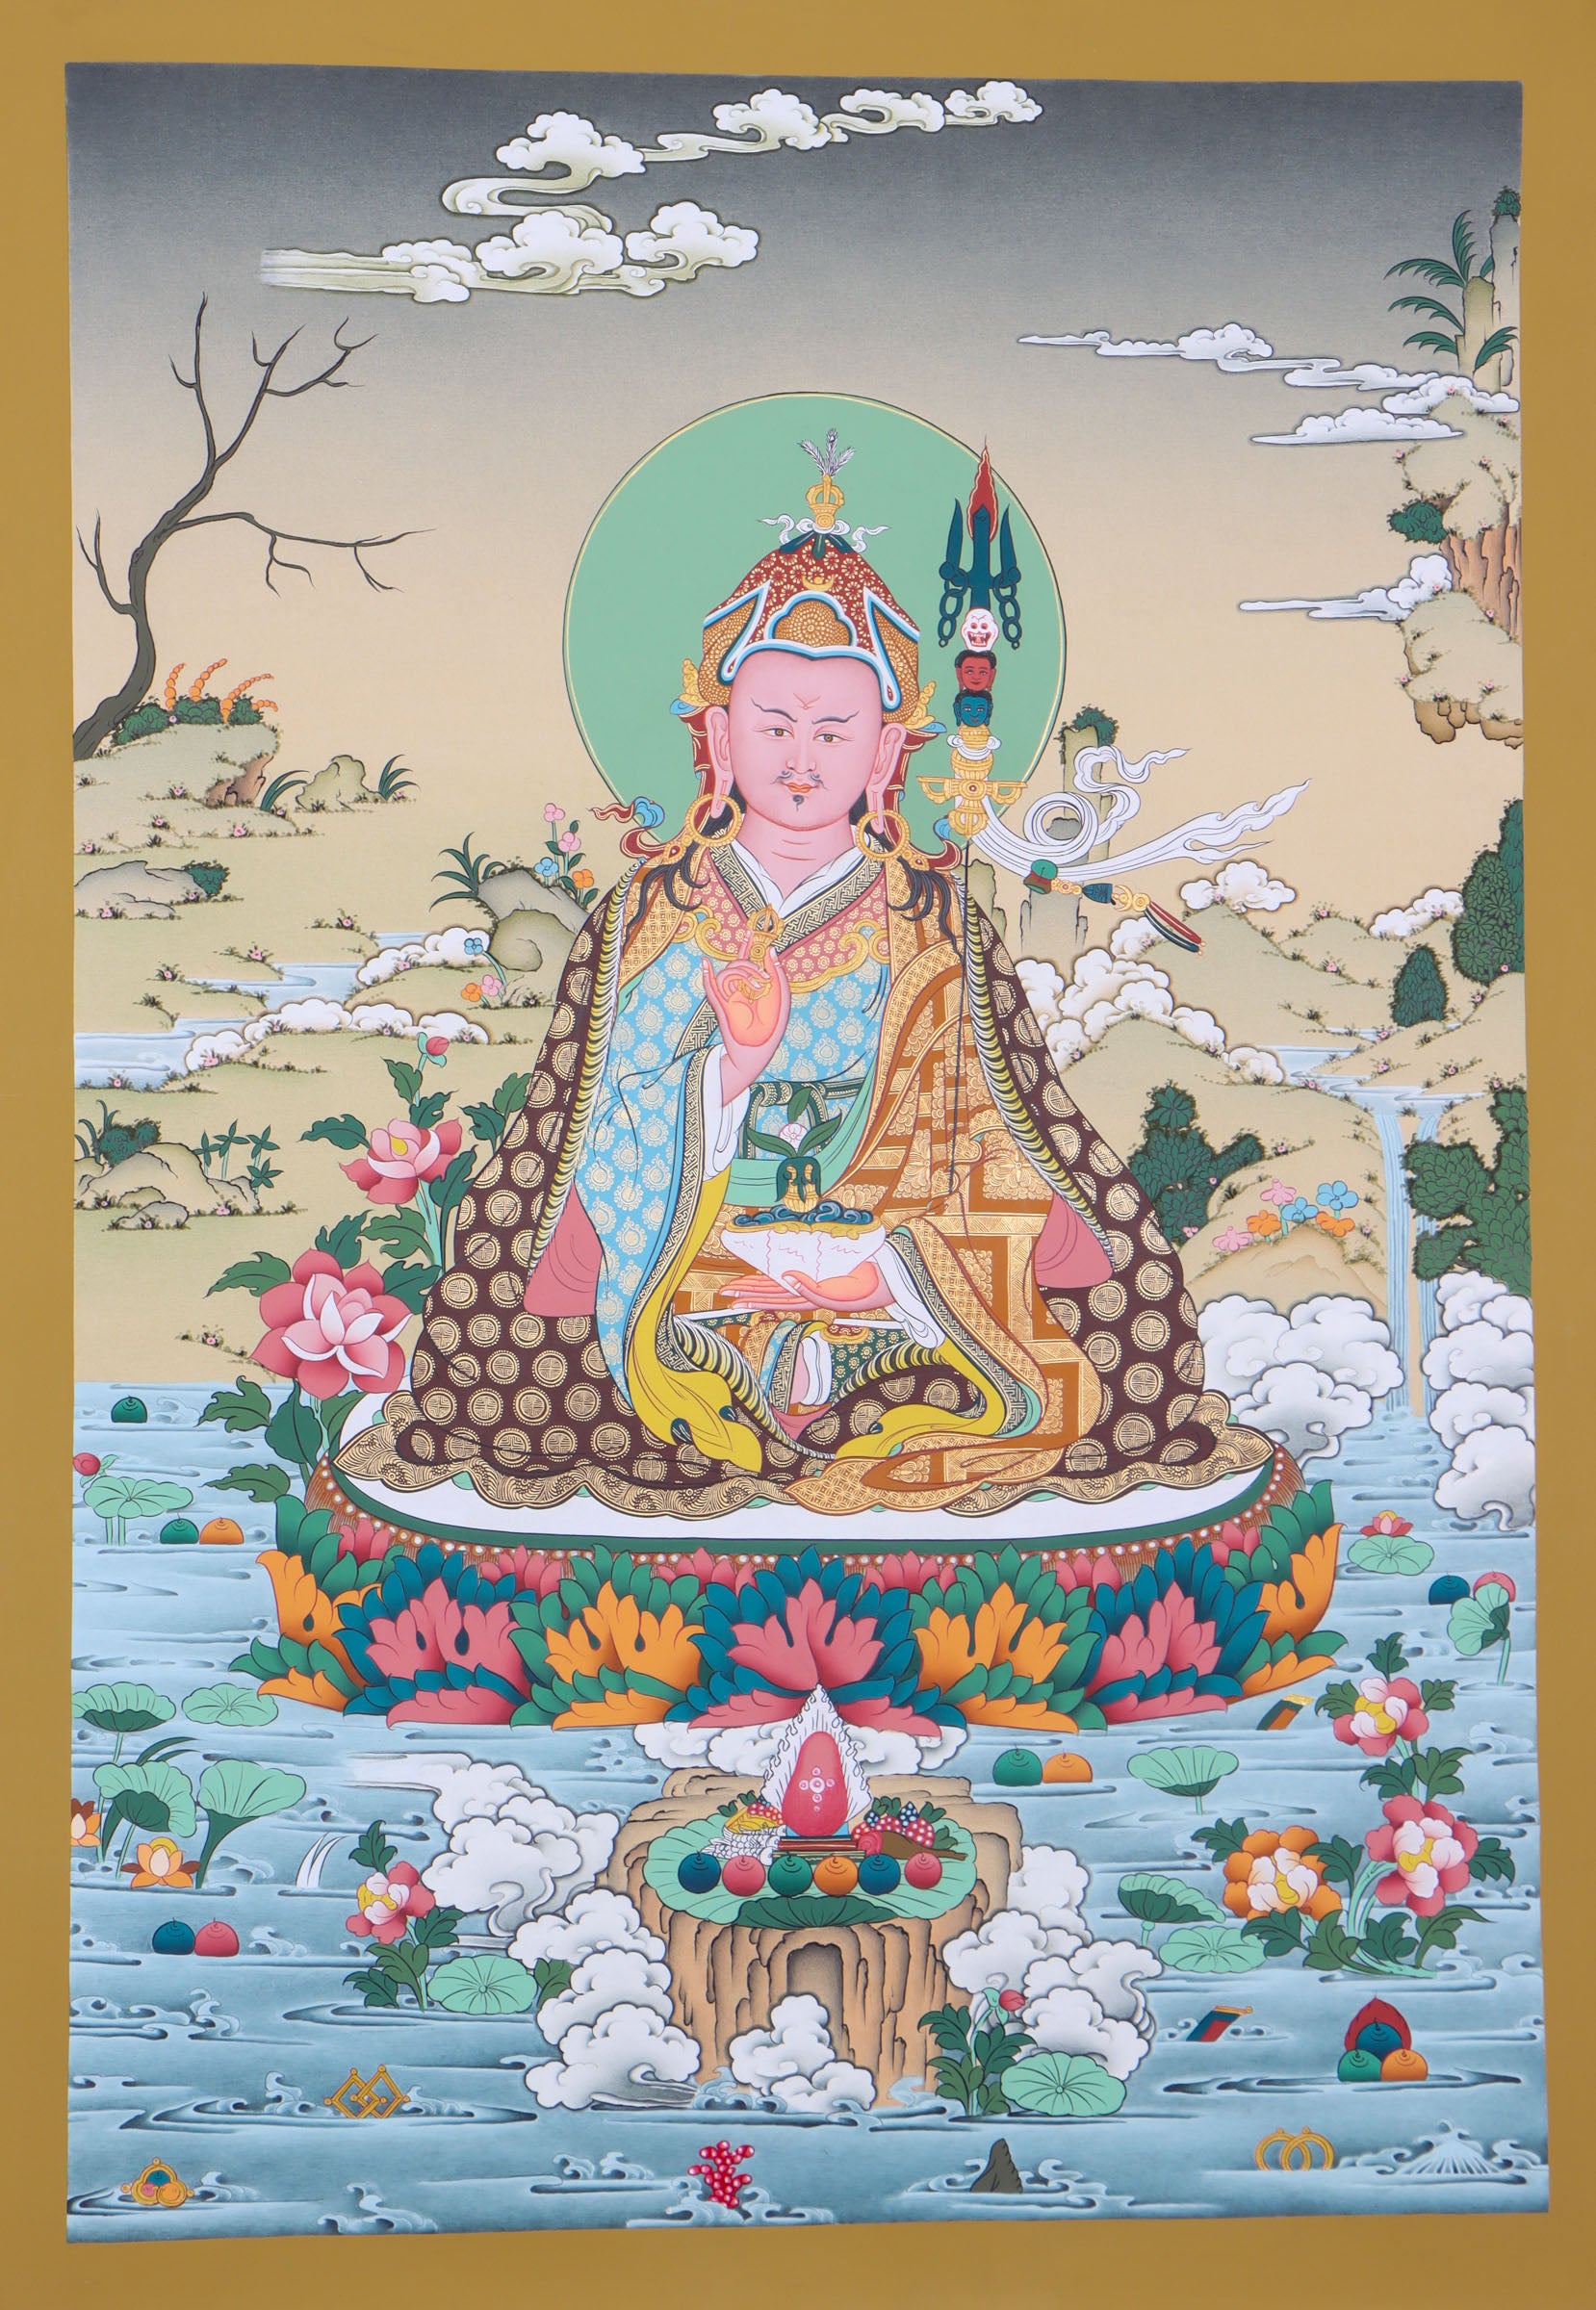 Guru thangka painting is an exquisite work of art and hand painted using natural stone color.